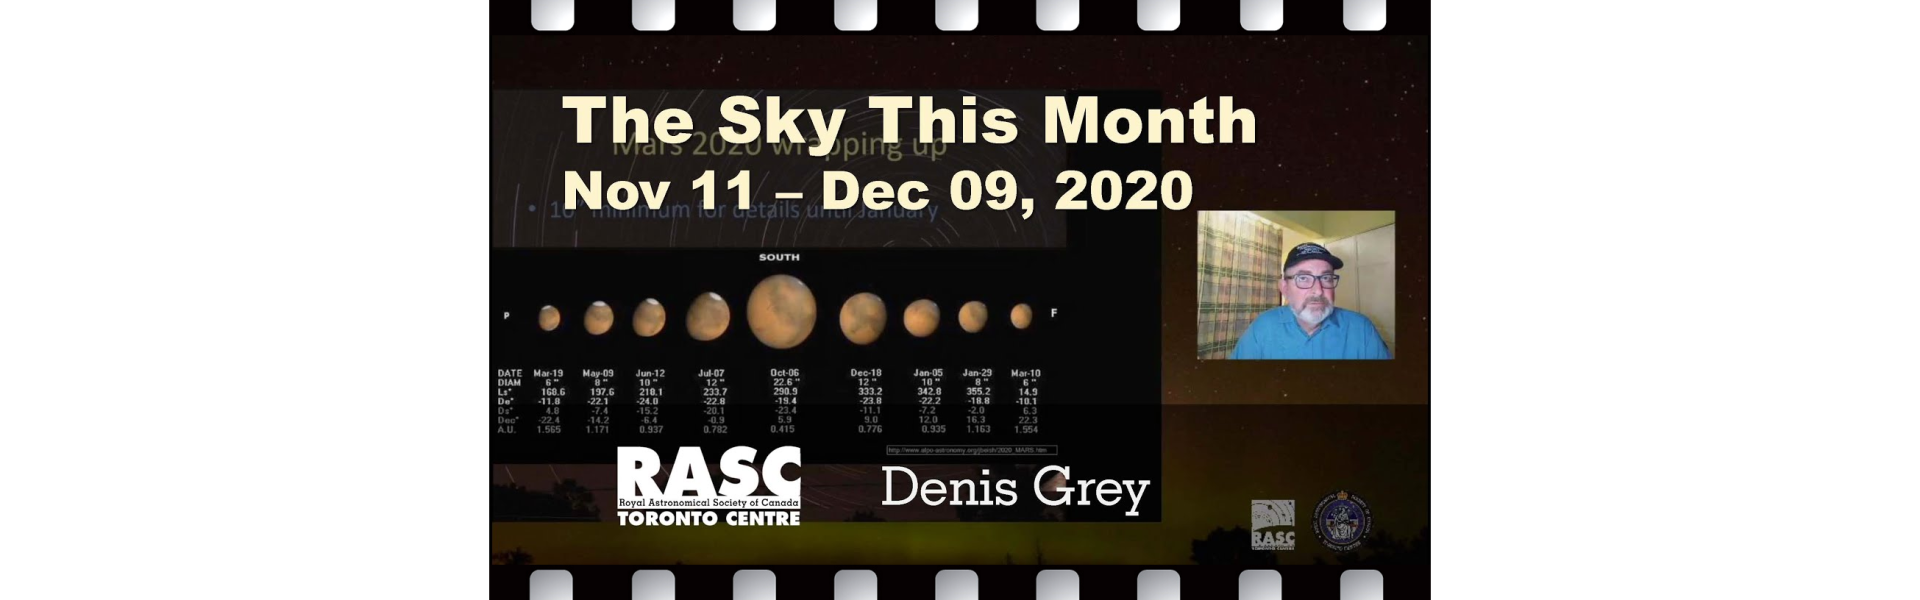 The Sky This Month for November 11 - December 9, 2020